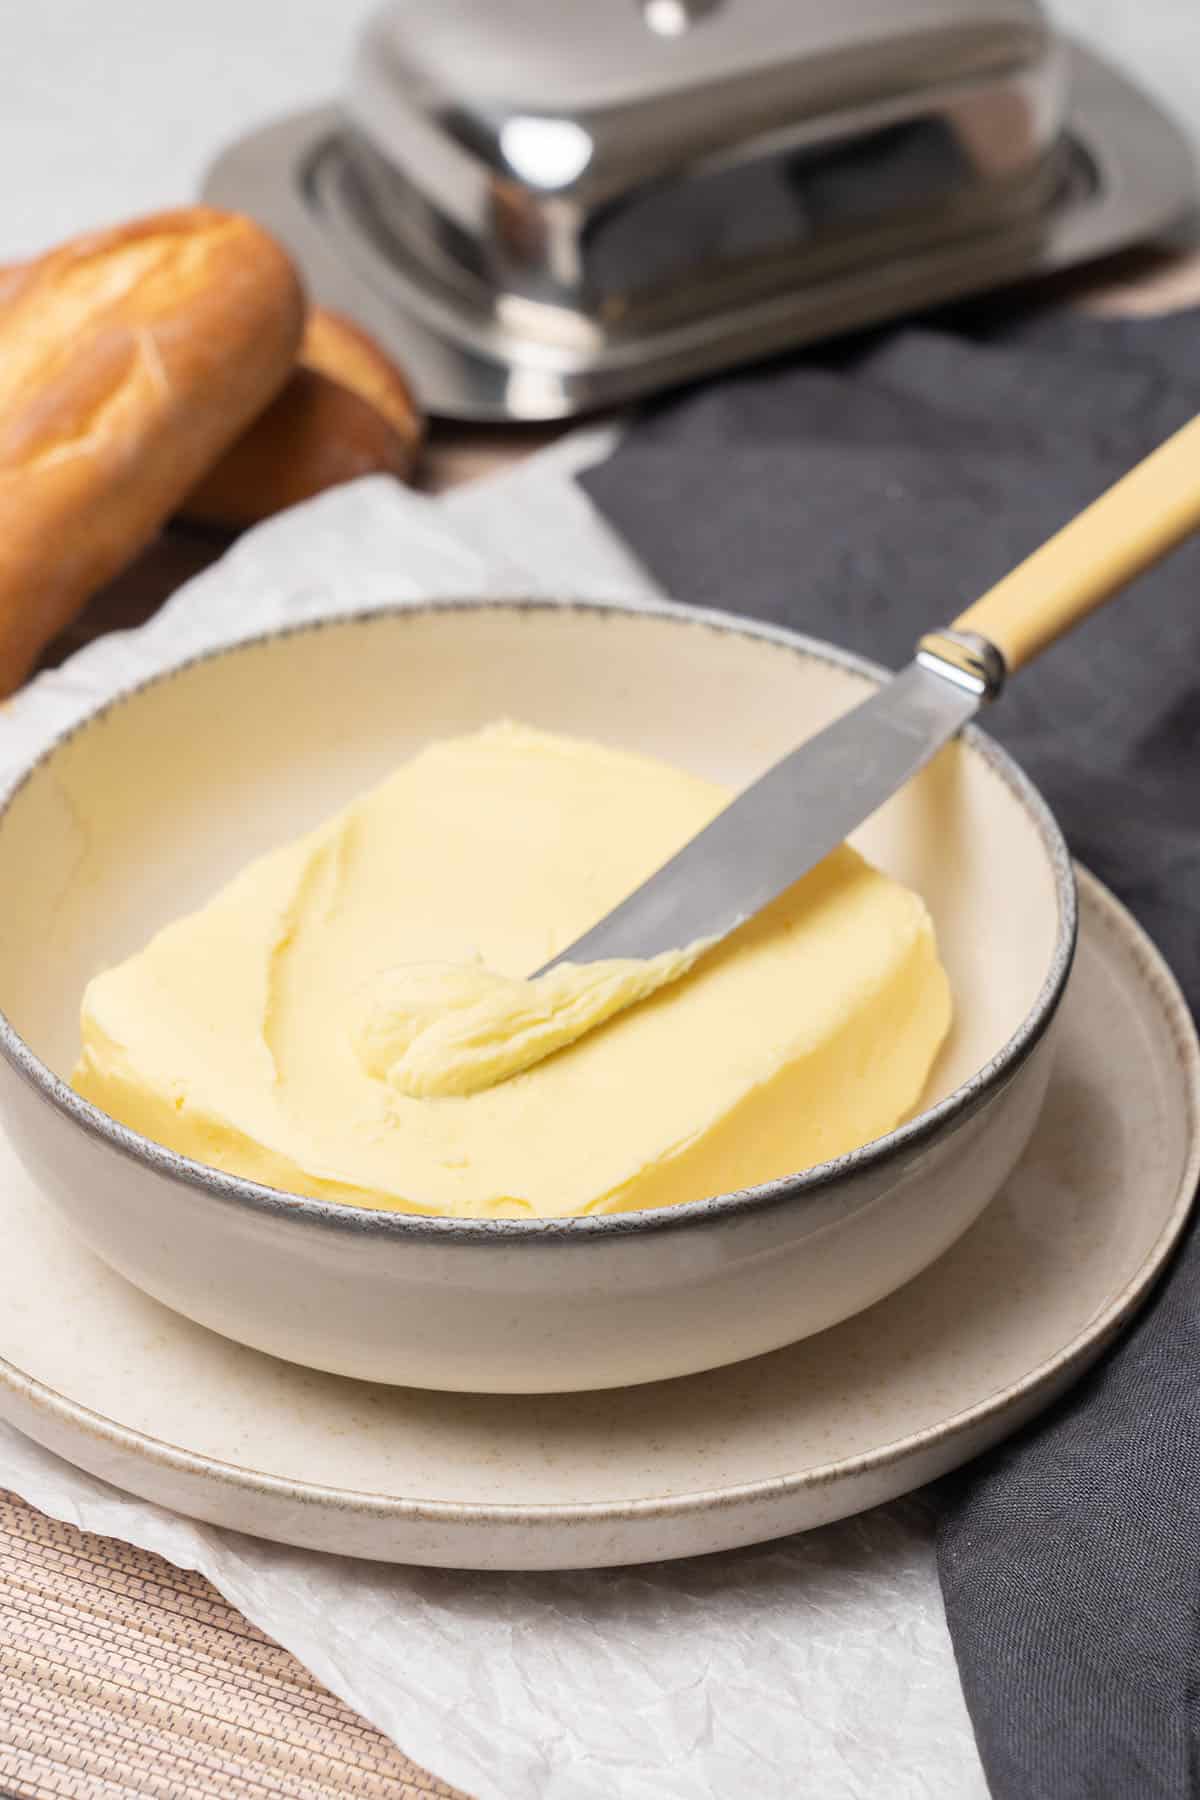 Homemade butter in a plate with a knife.